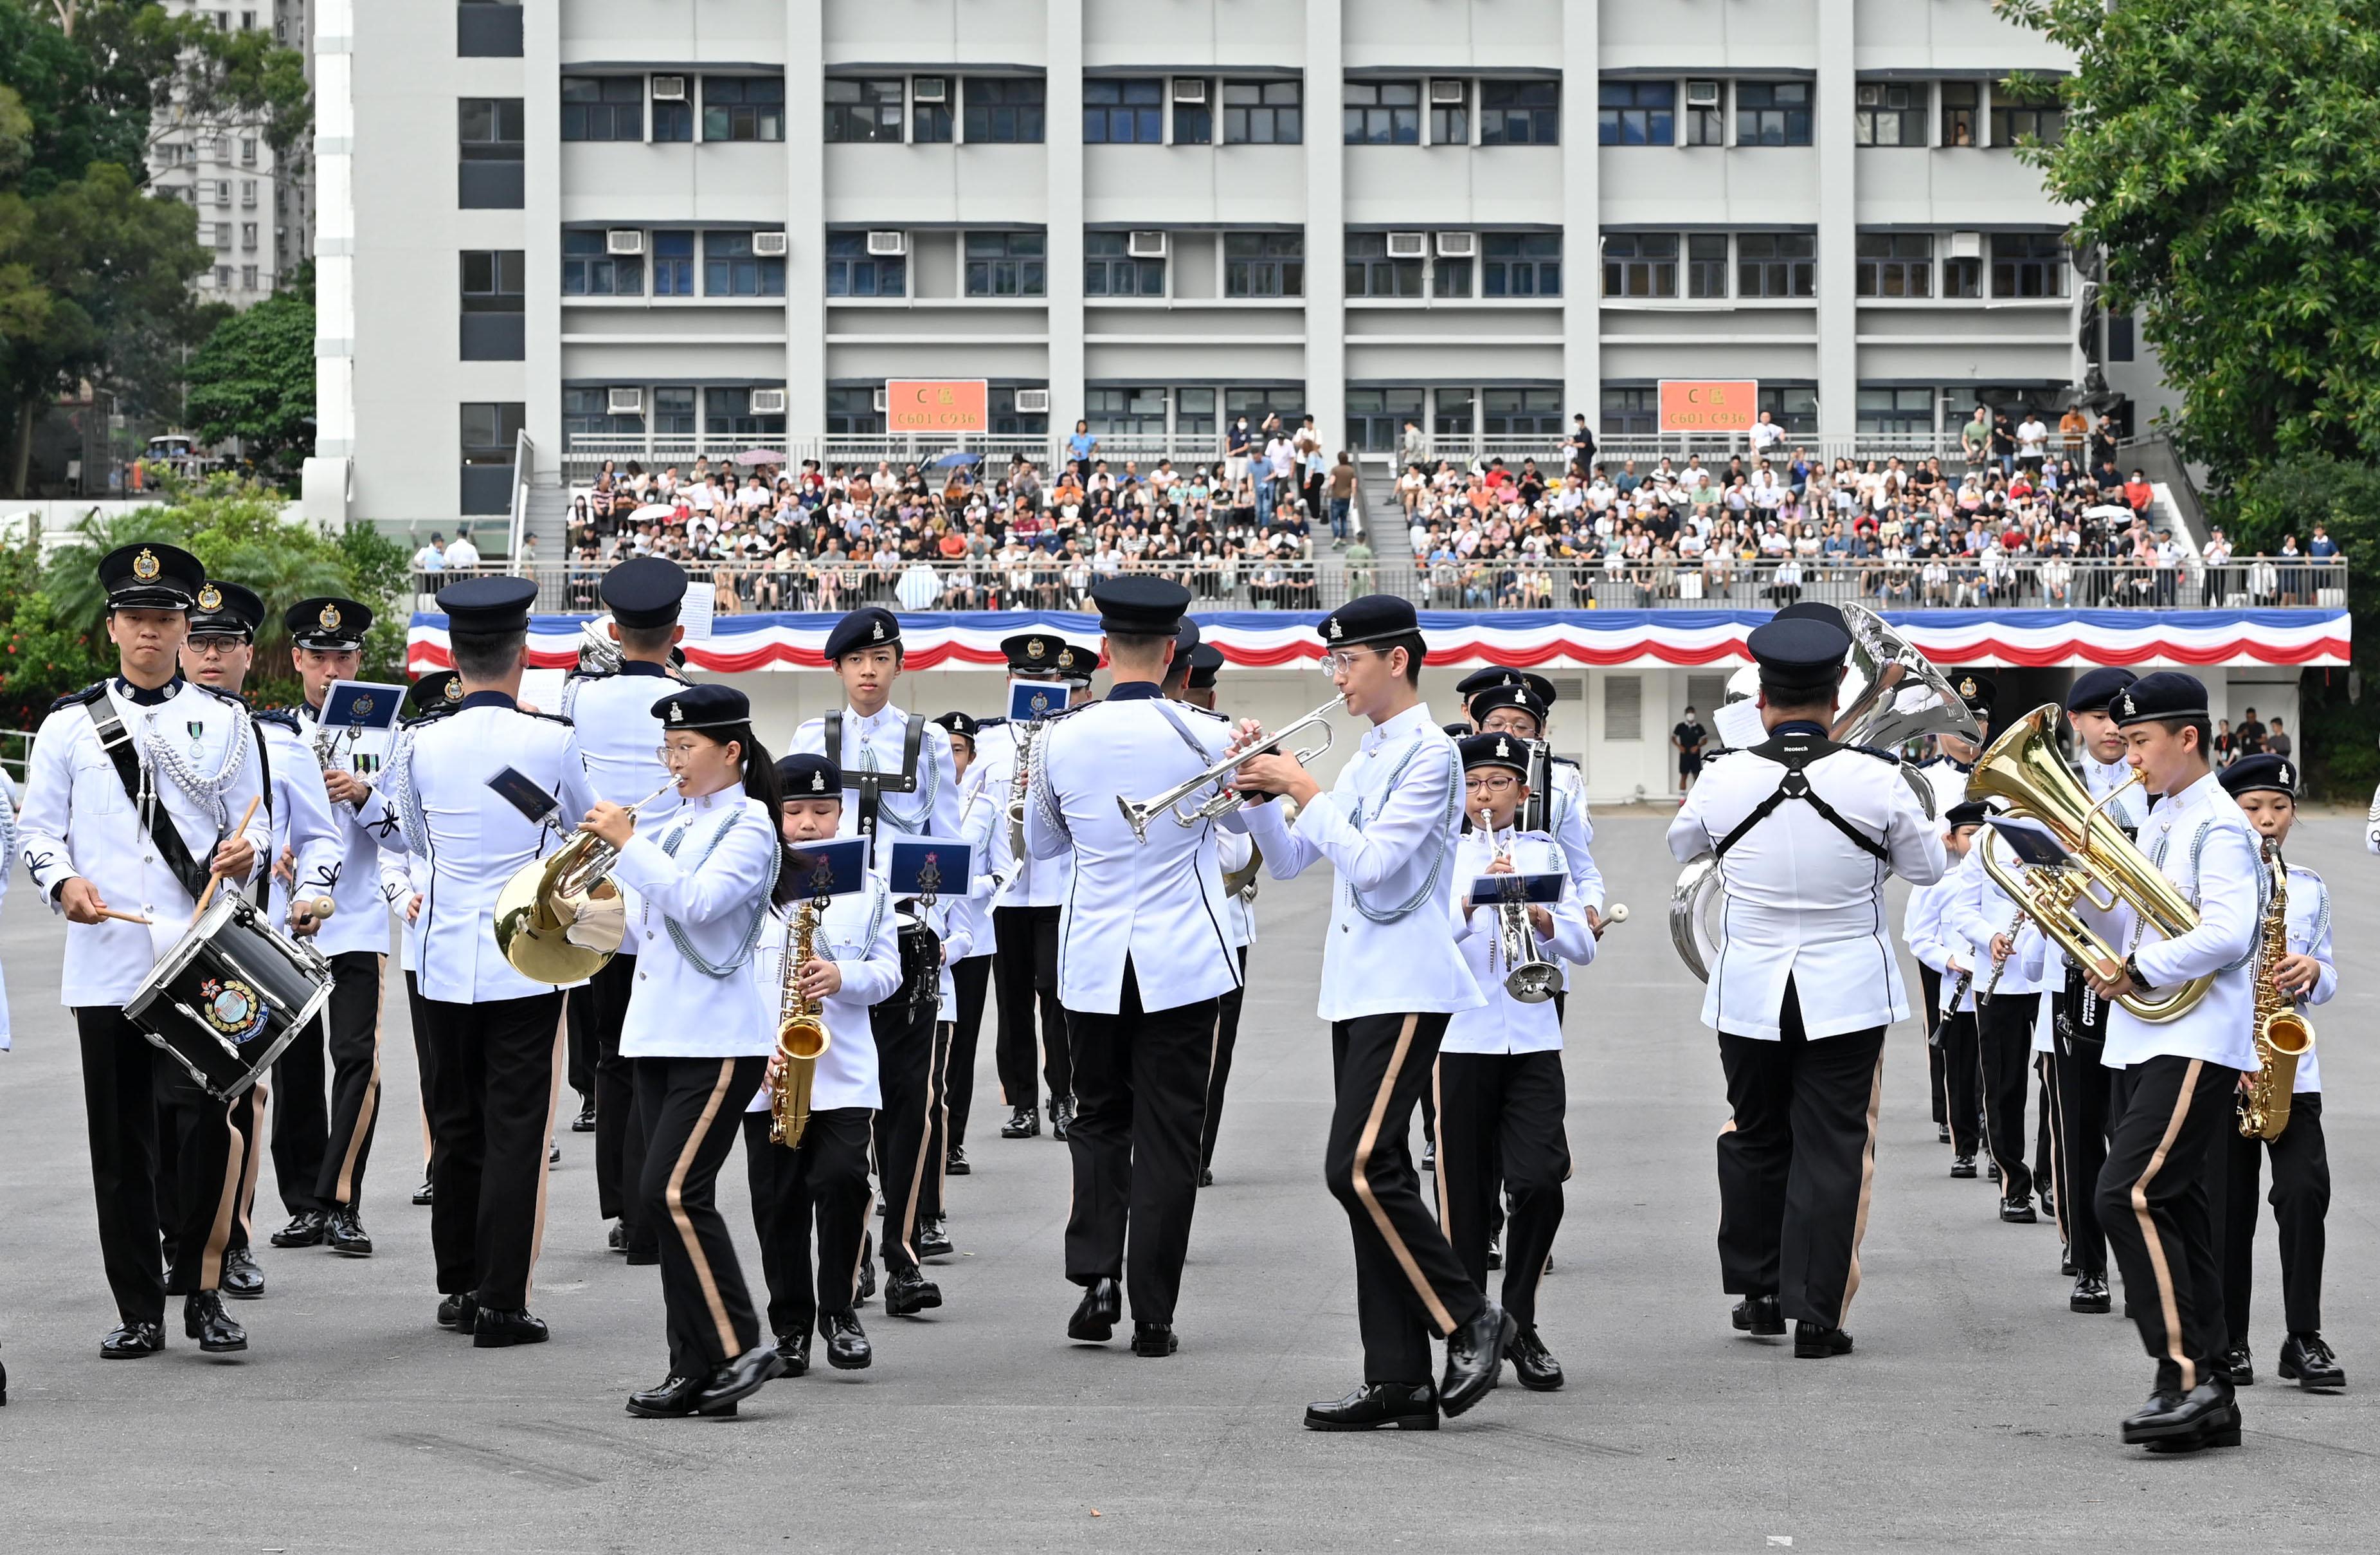 The Police Band Cadet, for the first time, joins the Police Band to stage music and marching performance at the passing-out parade held at the Hong Kong Police College today (June 24).